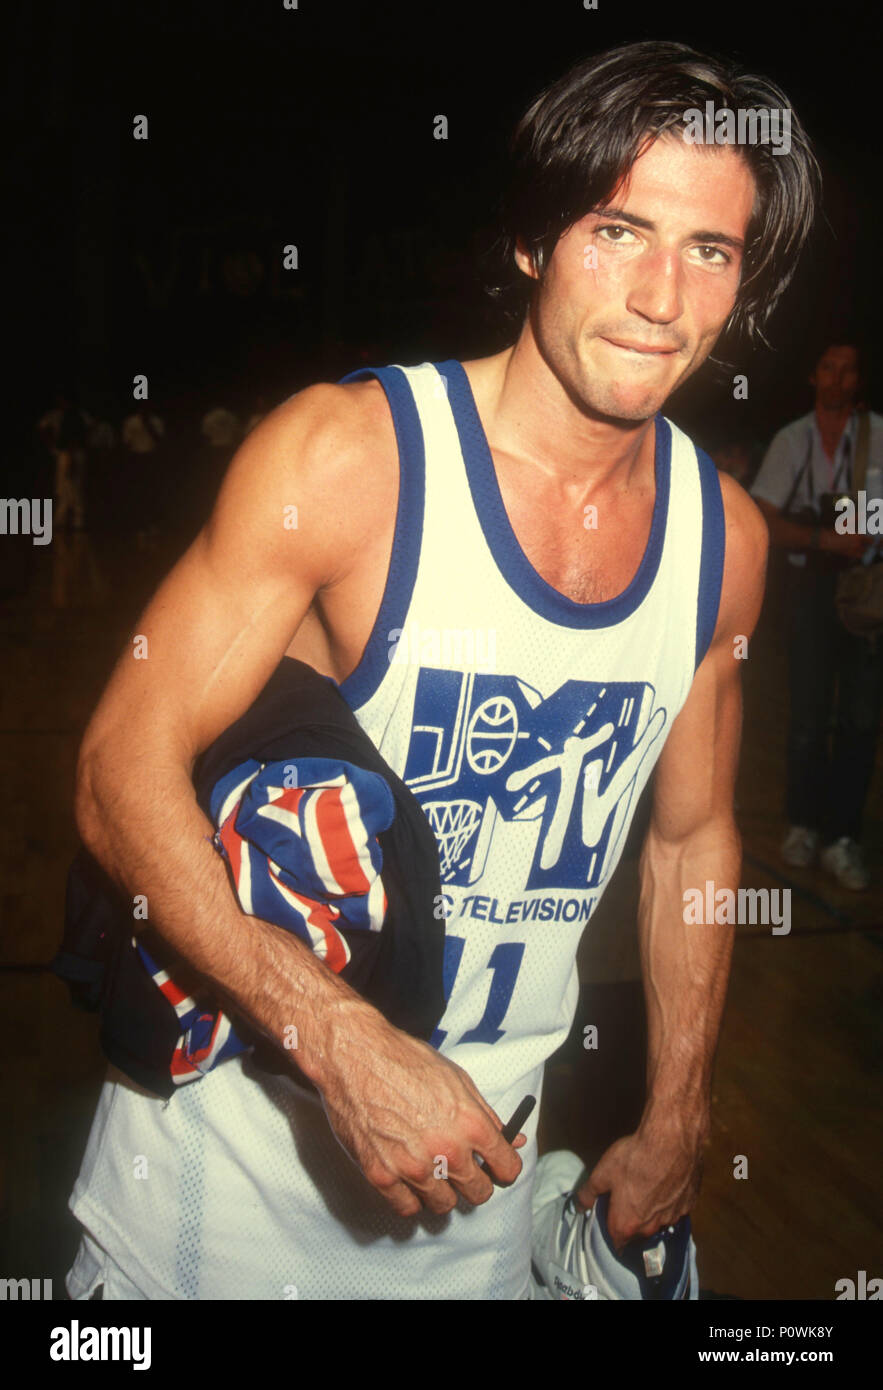 LOS ANGELES, CA - SEPTEMBER 15: Actor Billy Wirth attends MTV's First Annual Rock 'N Jock Basketball Game on September 15, 1991 at Loyola Marymount University in Los Angeles, California. Photo by Barry King/Alamy Stock Photo Stock Photo